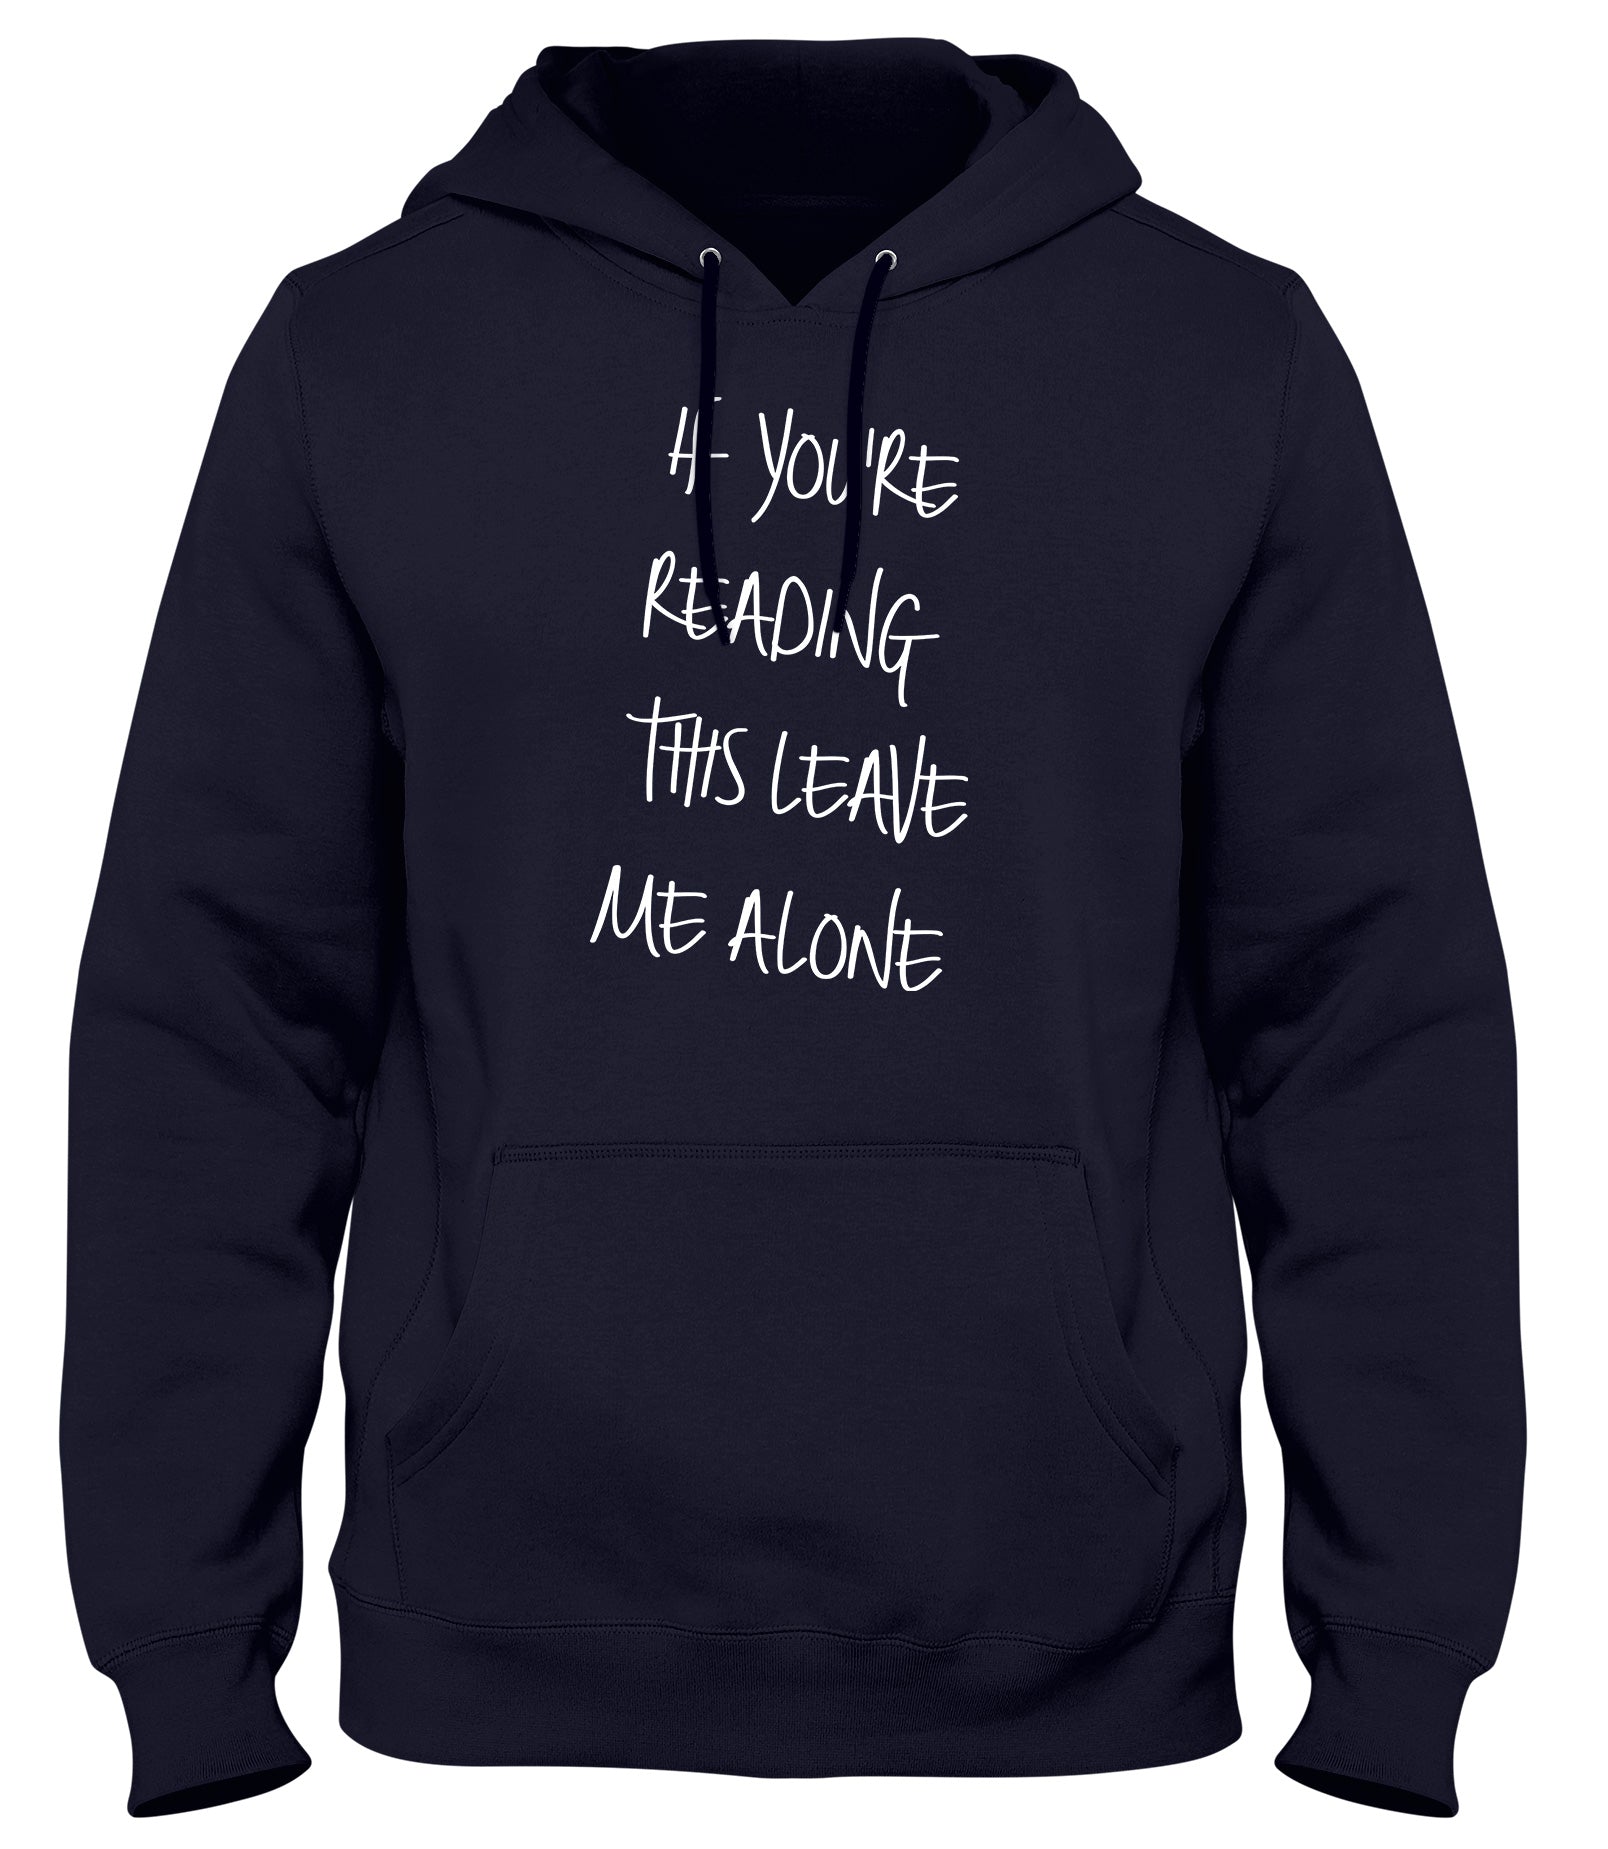 IF YOU ARE READING THIS LEAVE ME ALONE MENS LADIES WOMENS UNISEX HOODIE